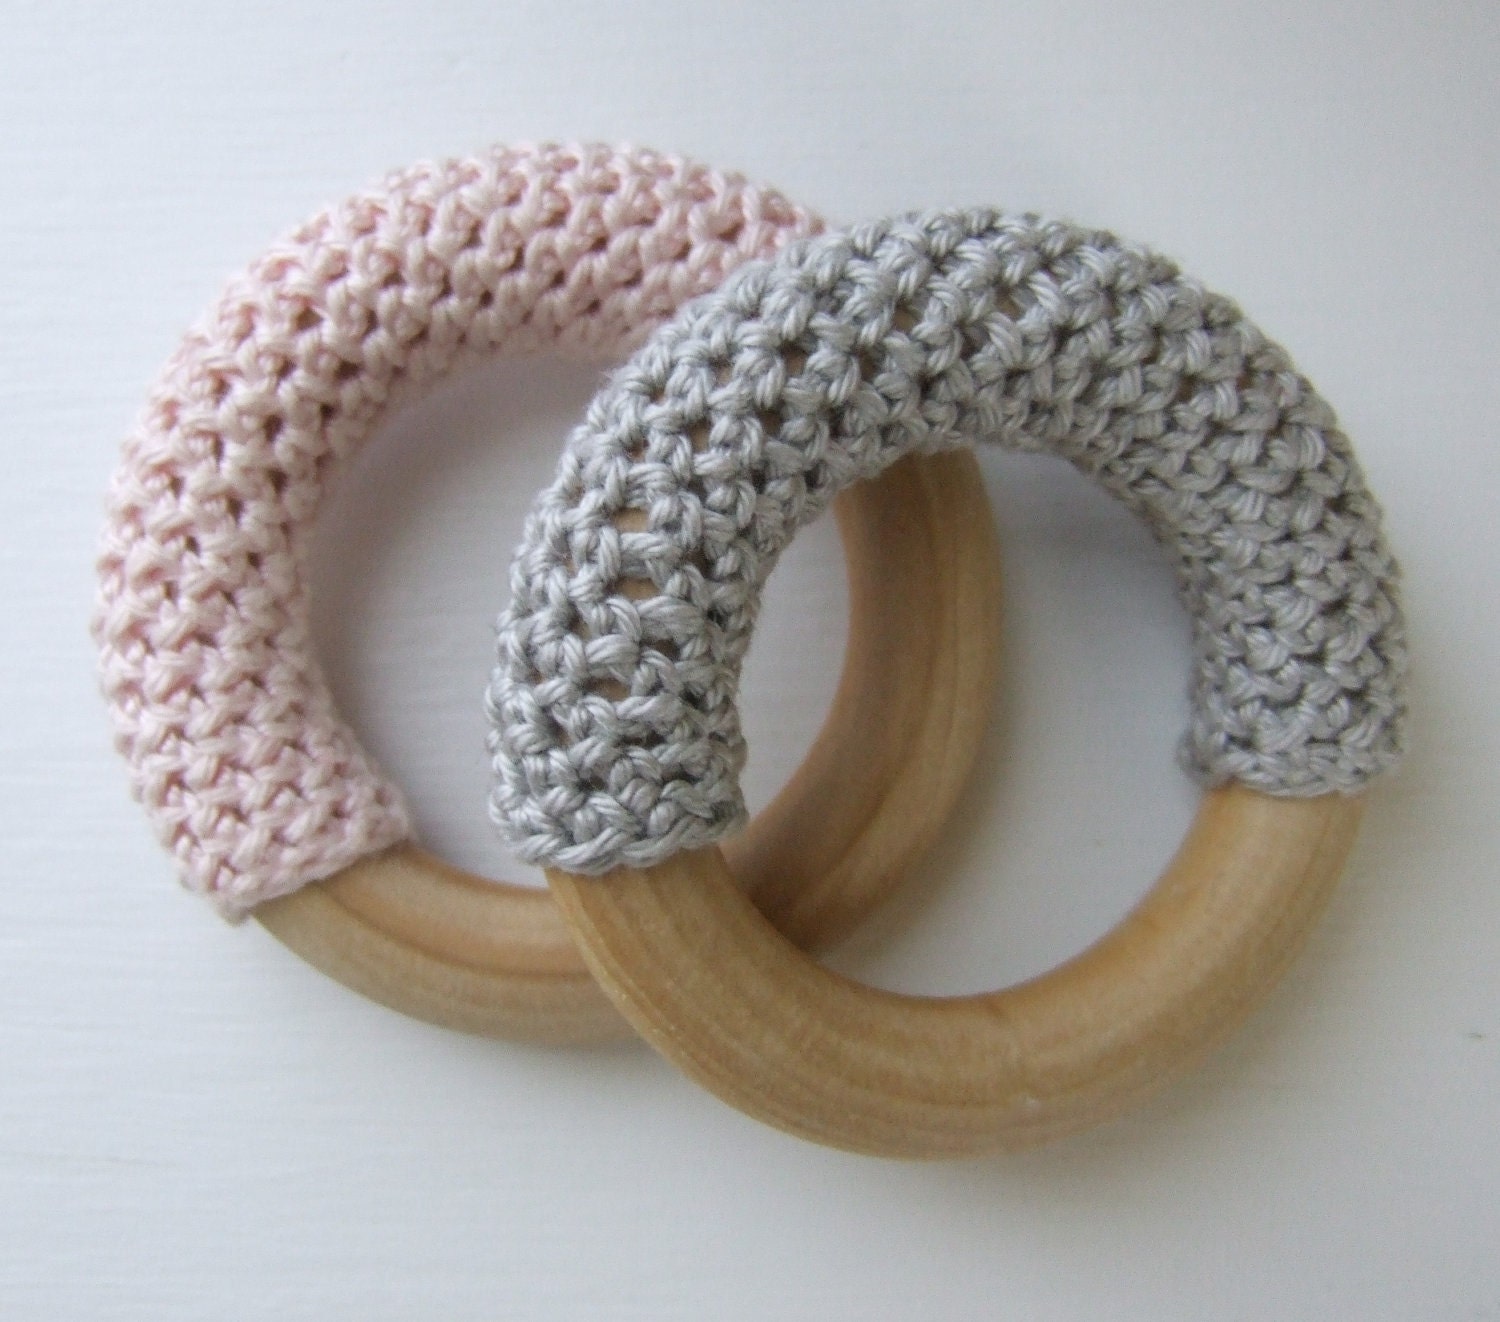 Pink and Grey Hand Crocheted Wooden Teething Rings (Set of Two with Organic Carry Bags) - mimiandlu